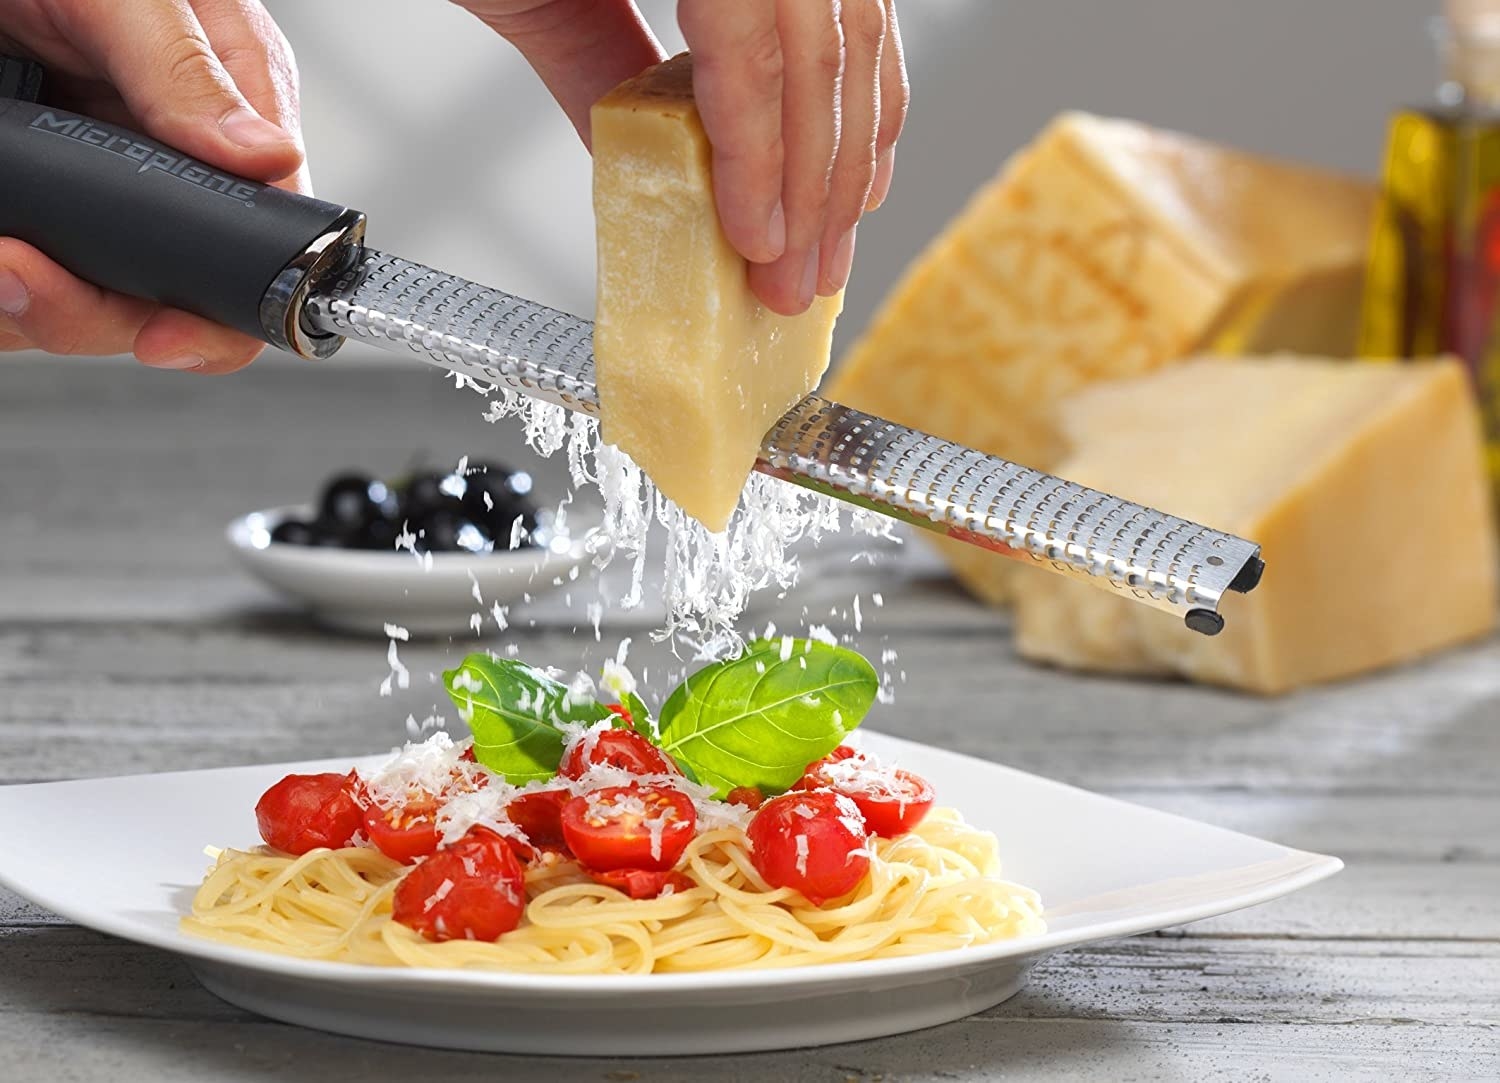 The microplane grating a block of cheese over a plate of pasta